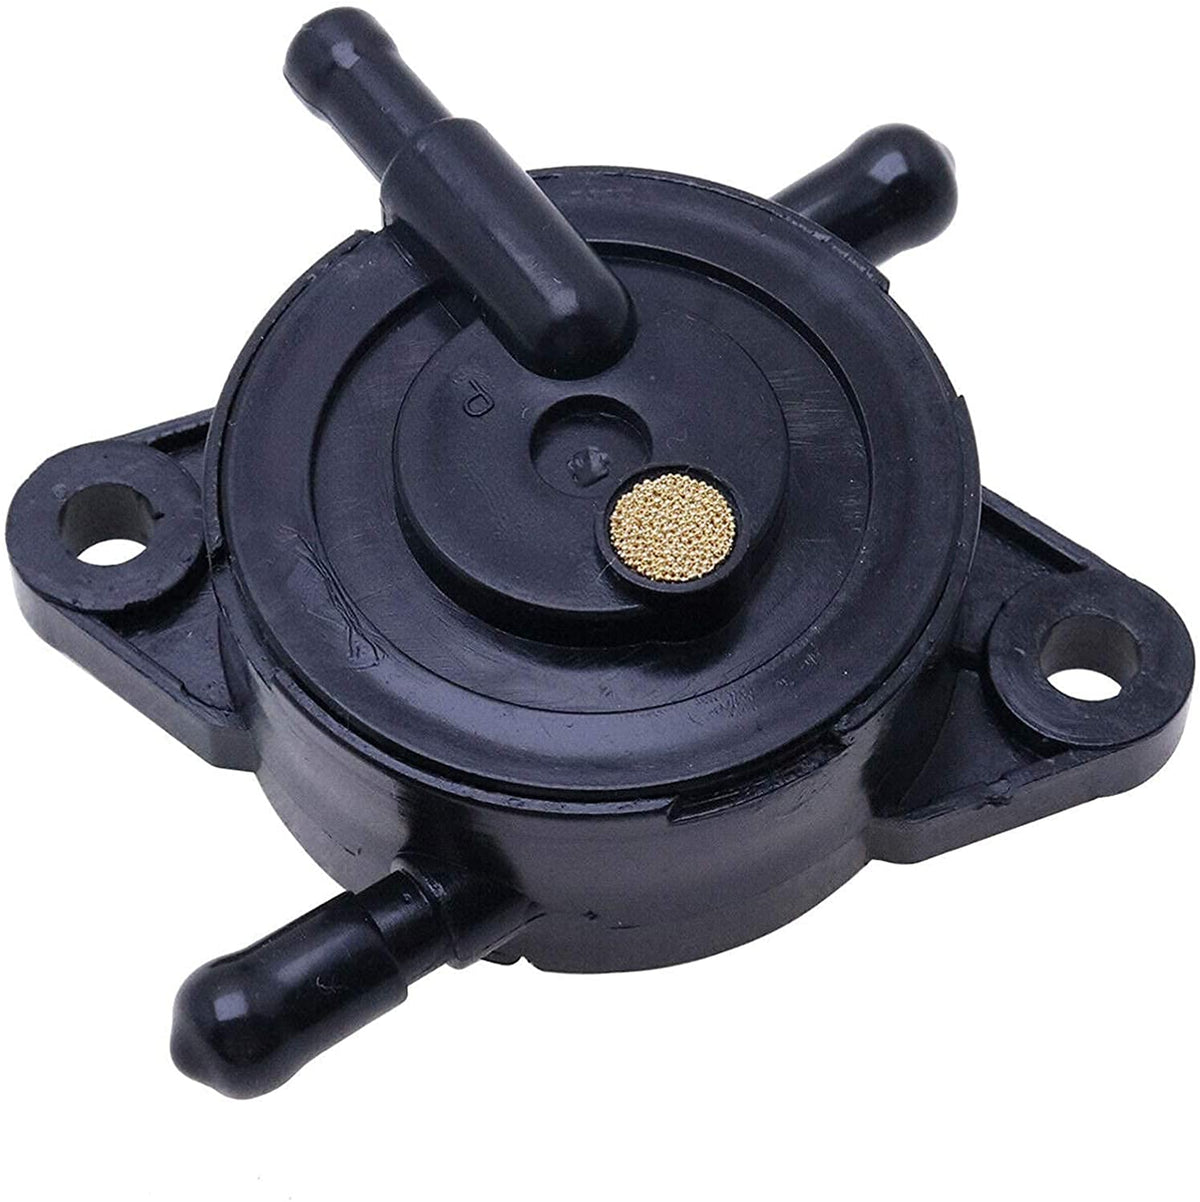 Fuel Pump UC16533 for John Deere X300 X300R X304 X350R X310 X320 X324 X360 X500 X530 X534 647A 657A 667A Z445 Z465 Replace Stens 520-444 054-113 - KUDUPARTS